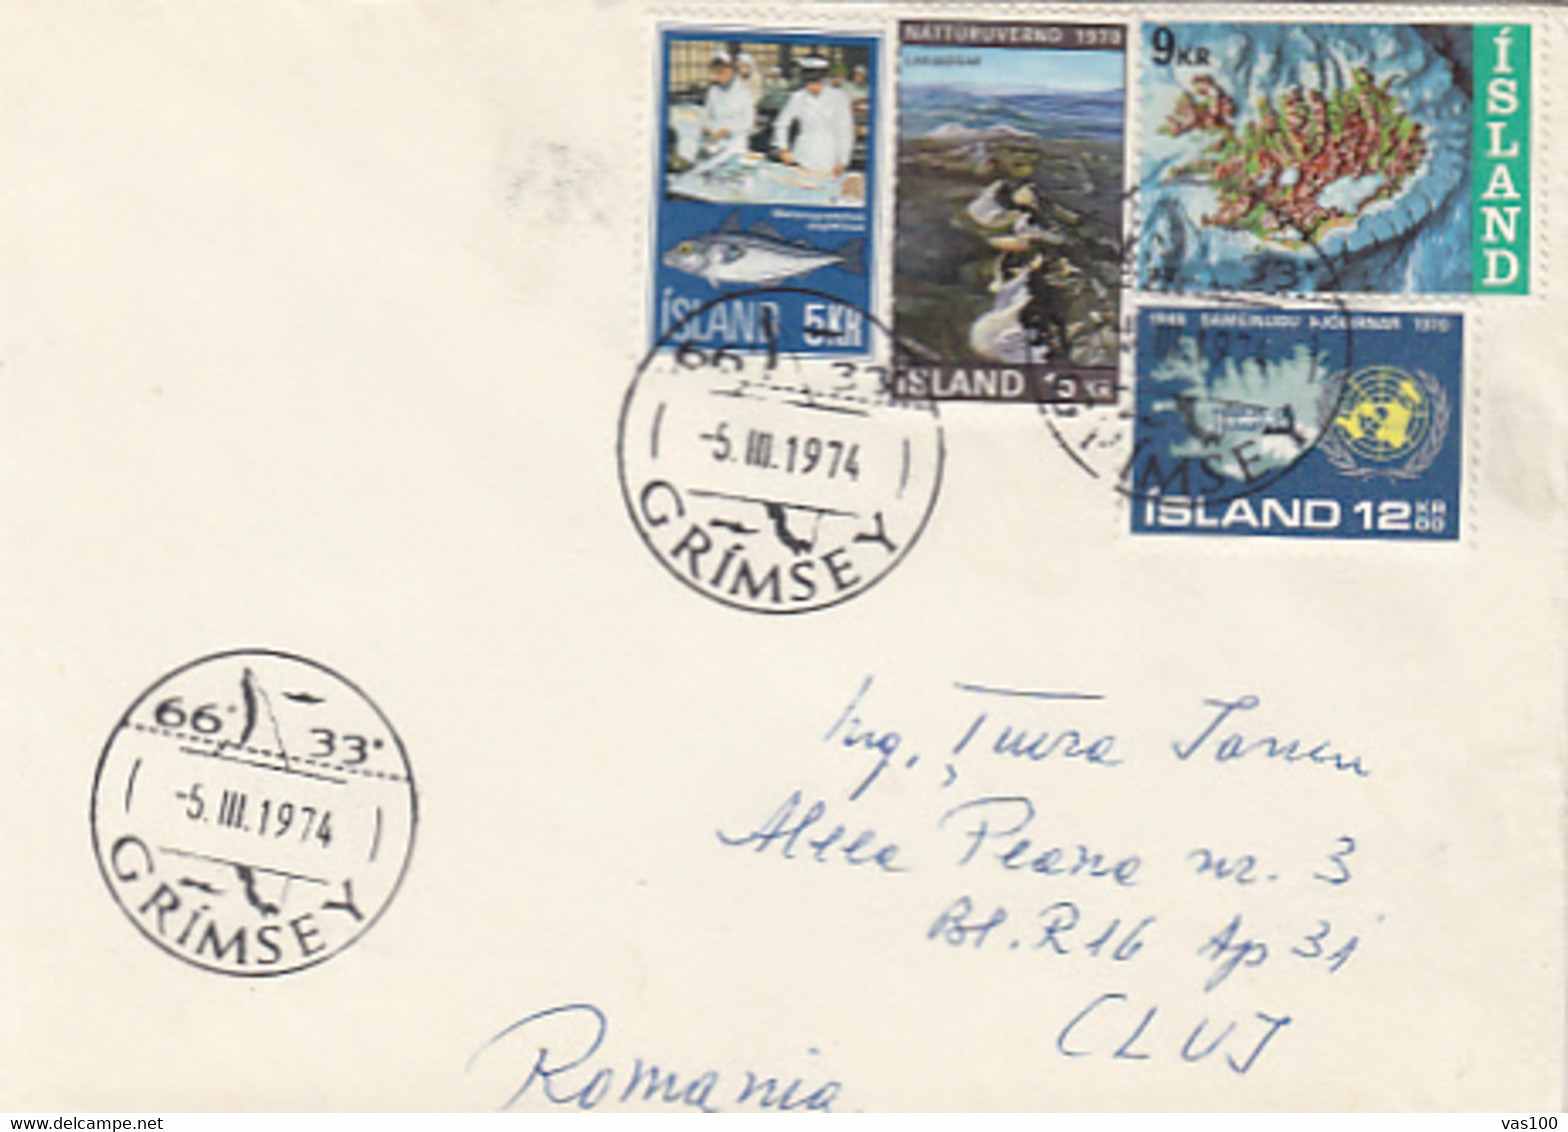 GRIMSAY ISLAND SPECIAL POSTMARK, FISH PROCESSING INDUSTRY, ISLAND VEWS STAMPS ON COVER, 1974, ICELAND - Lettres & Documents